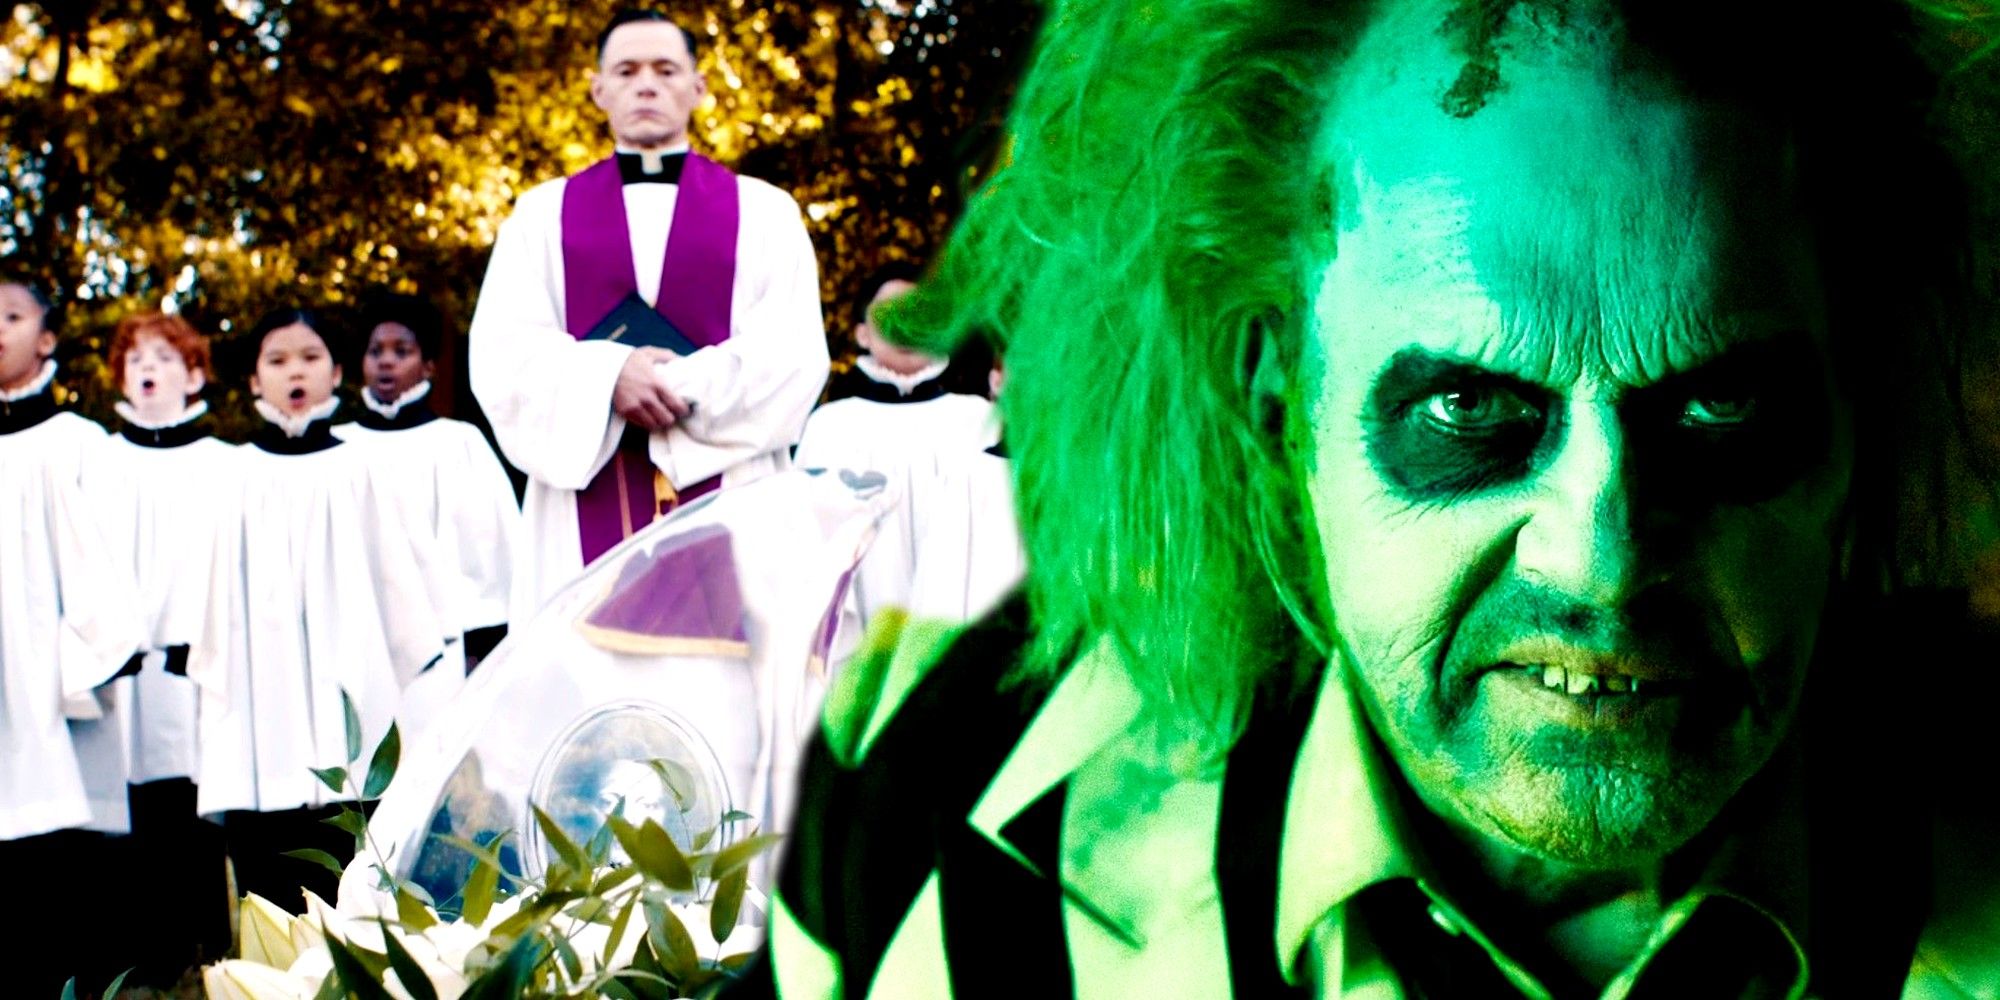 beetlejuice-beetlejuice-won’t-feature-1-original-movie-character,-new-report-confirms